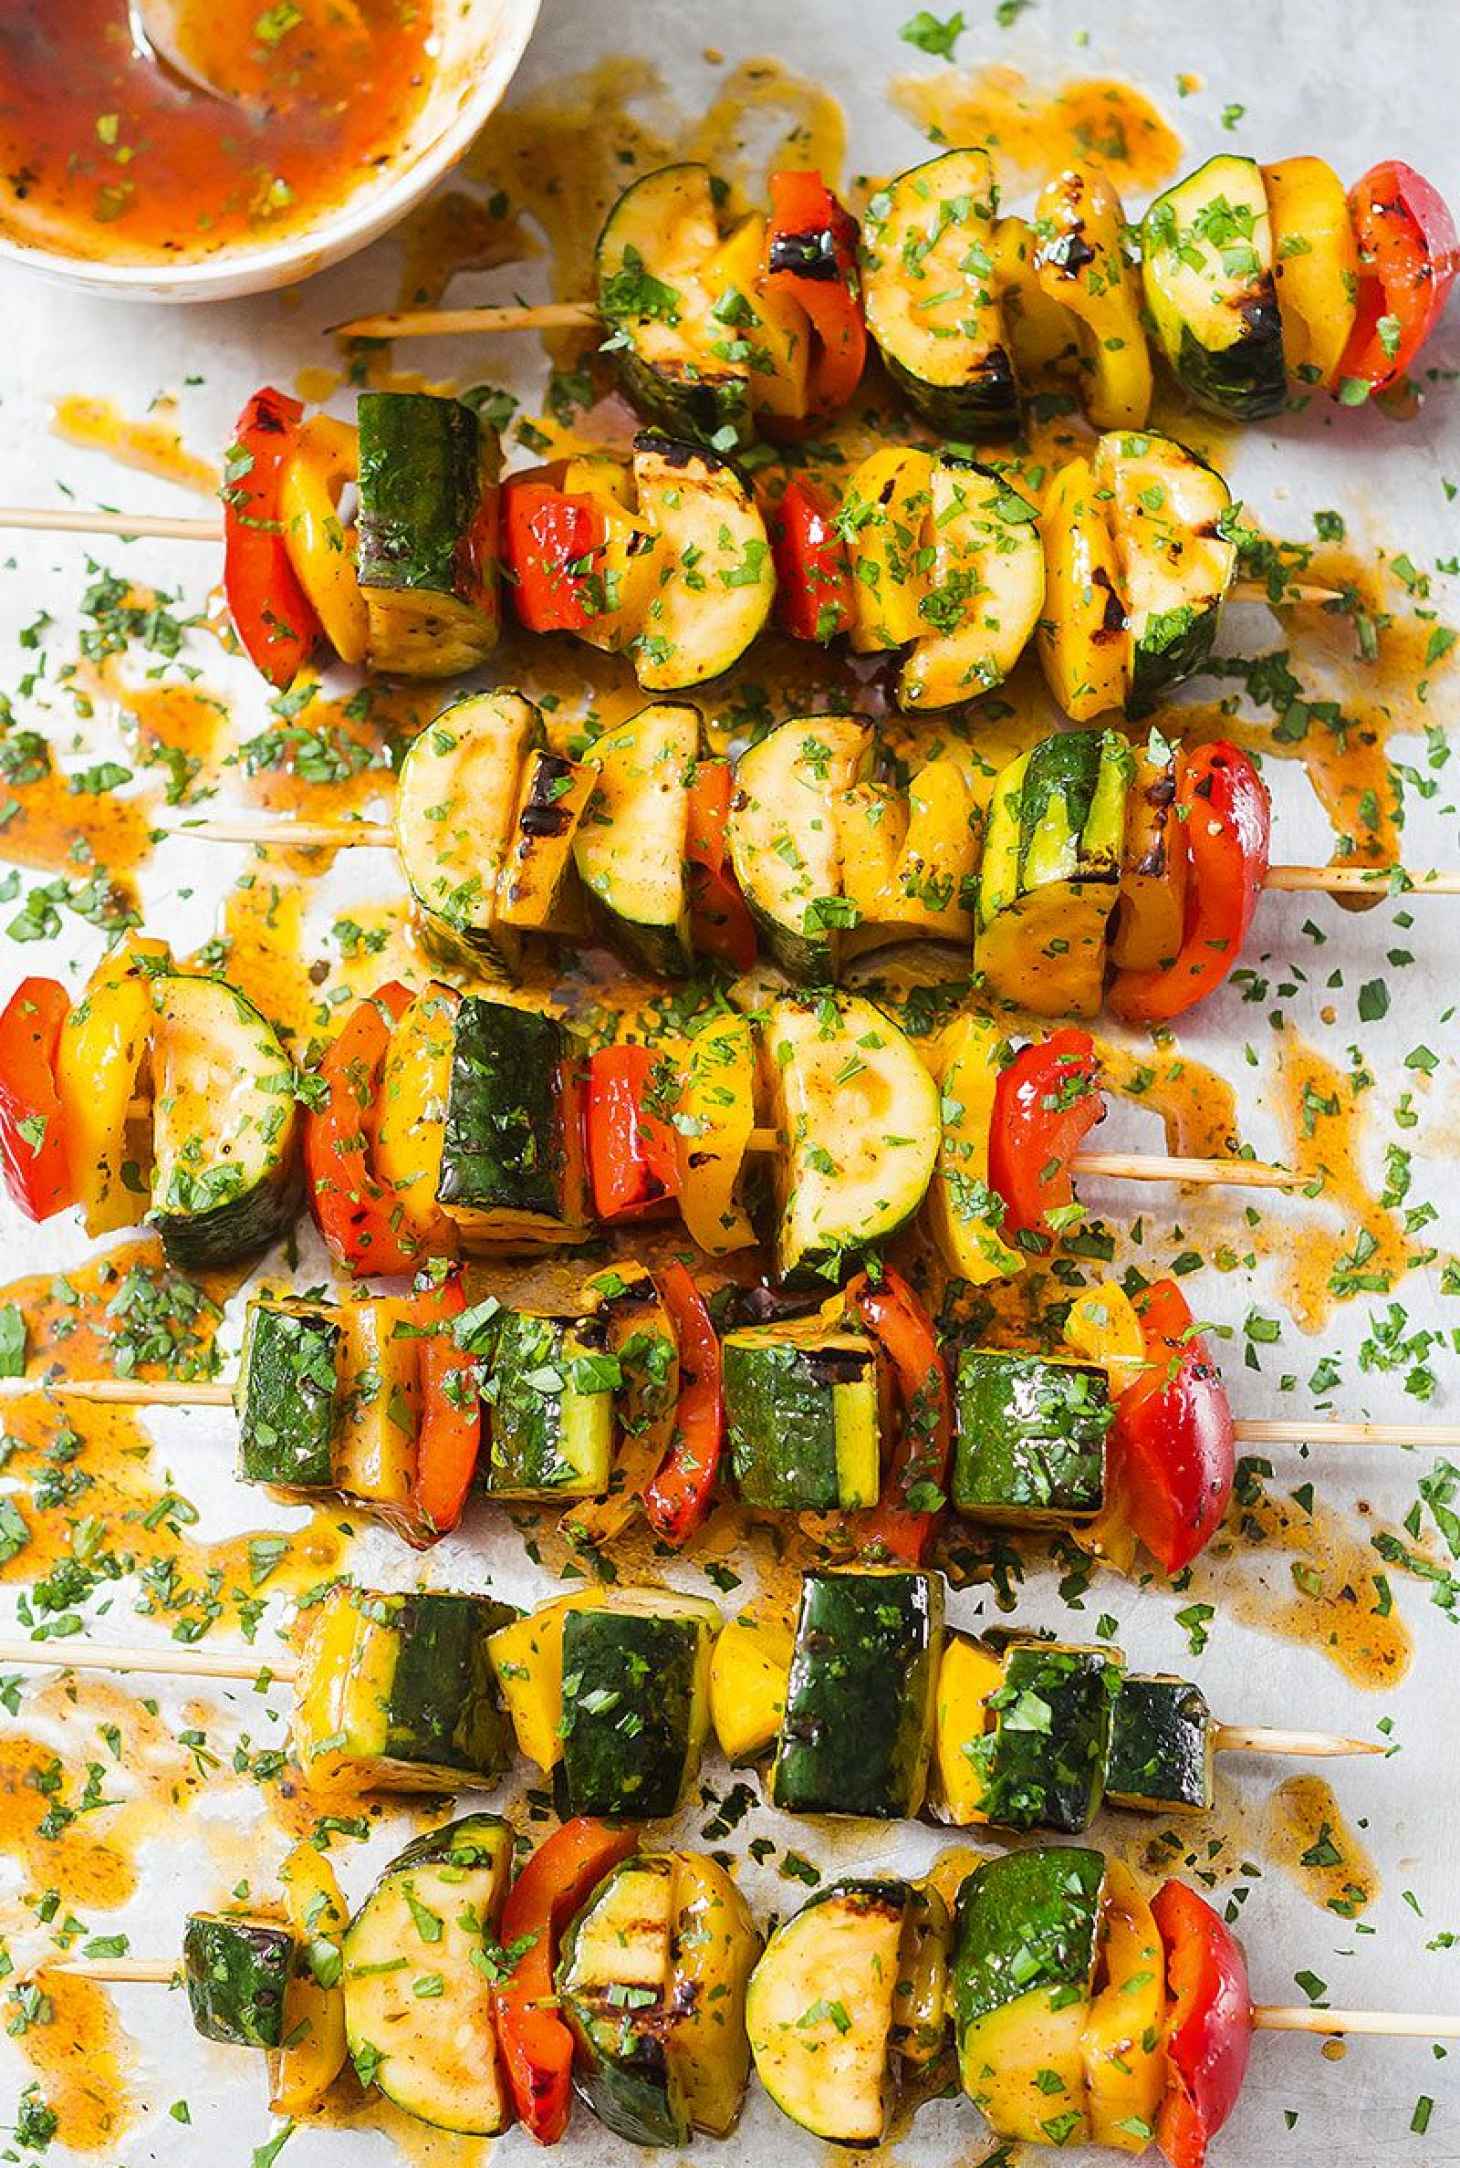 Grilled Zucchini with BBQ Sauce - #recipe by #eatwell101 - https://www.eatwell101.com/grilled-zucchini-bbq-sauce